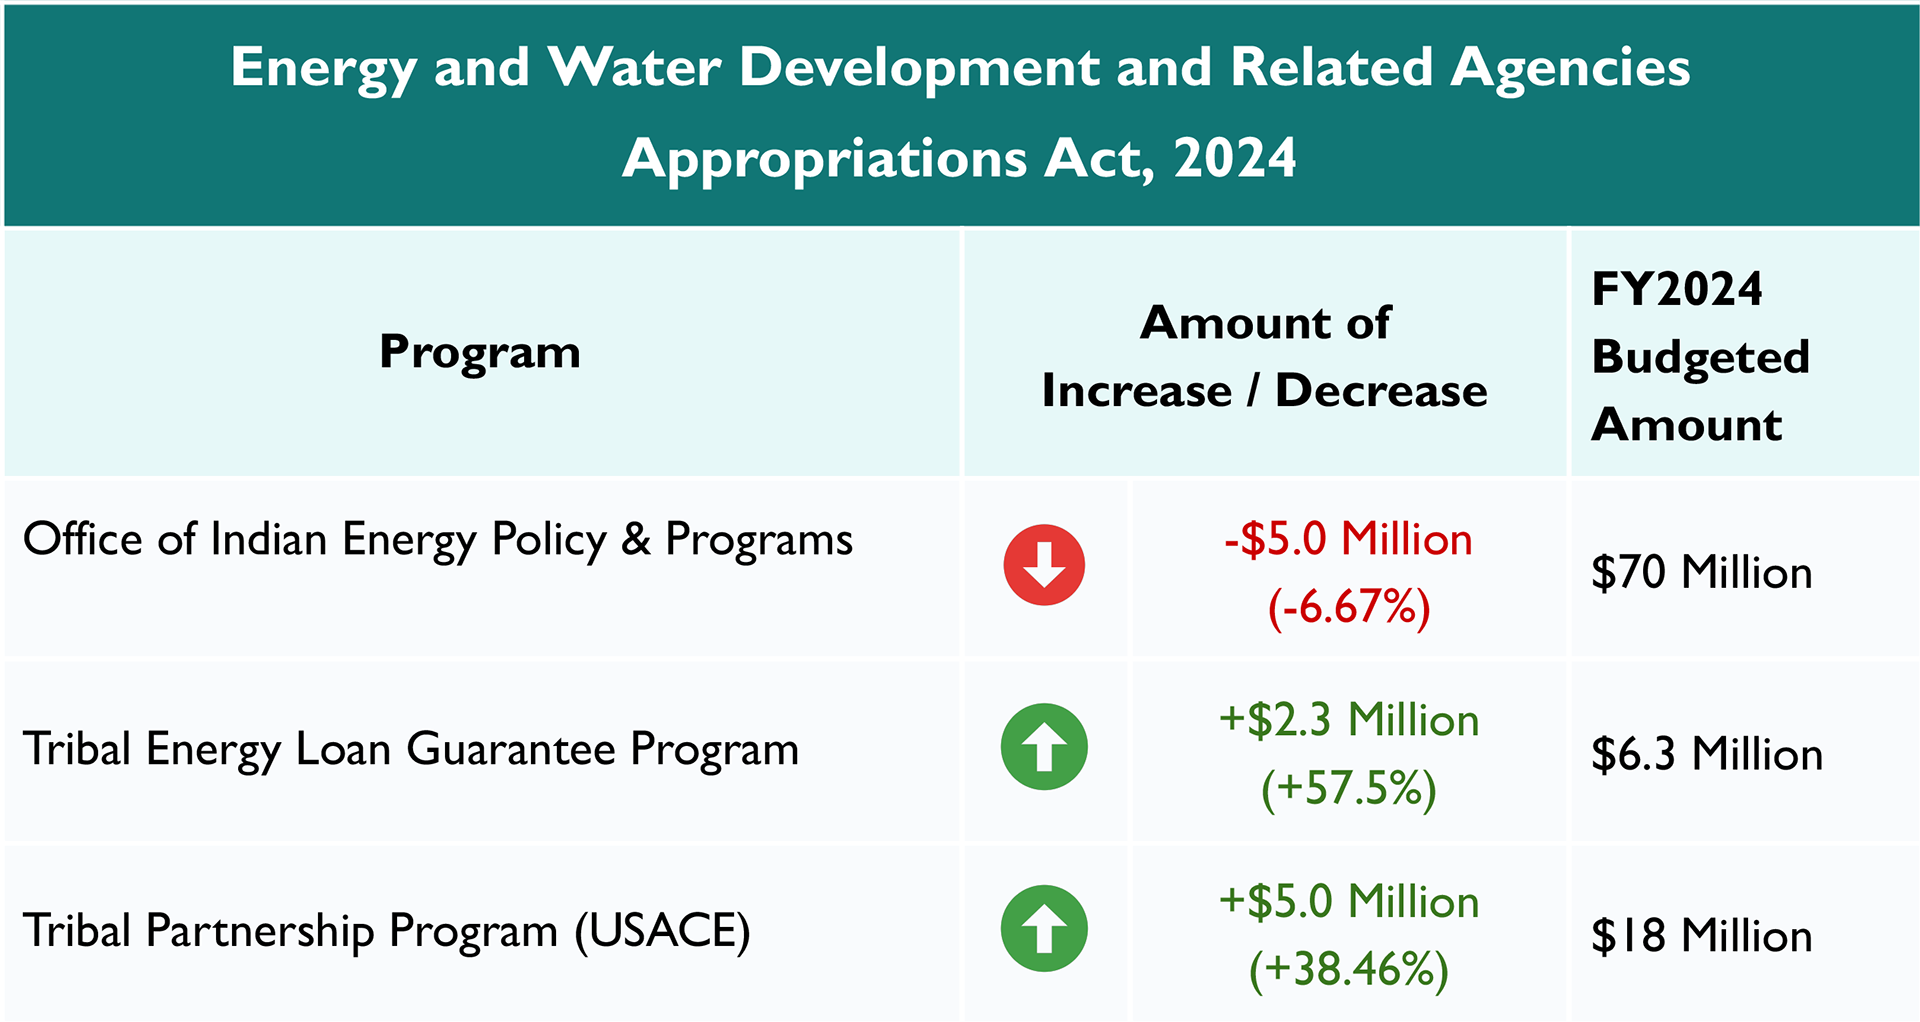 Energy and Water Development and Related Agencies Appropriations Act, 2024